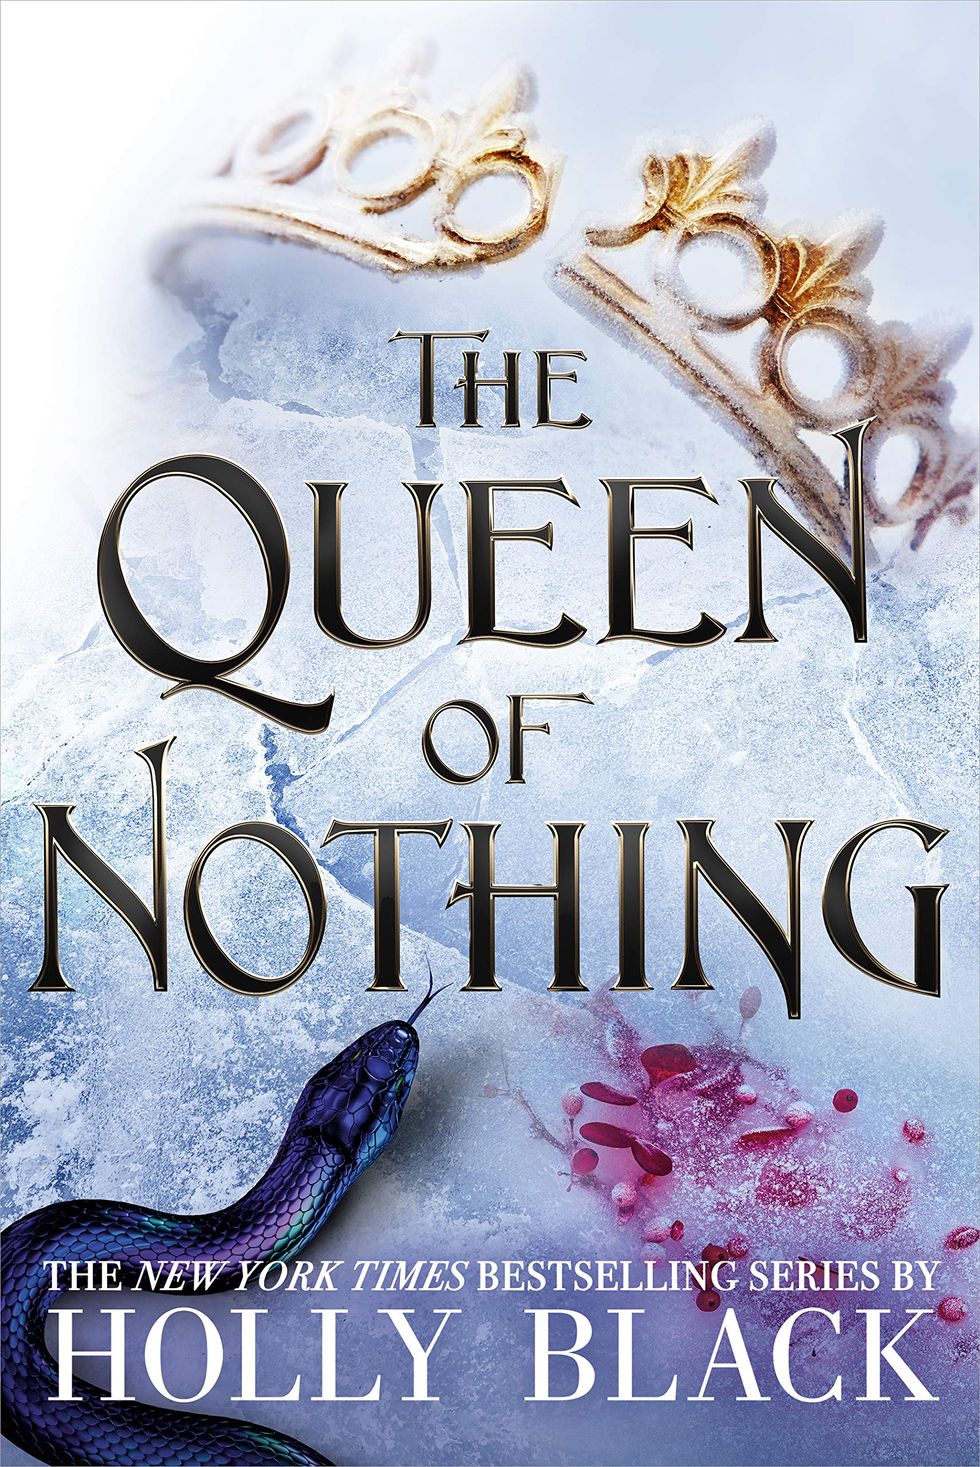 "The Queen of Nothing" by Holly Black - Best YA Books of 2019